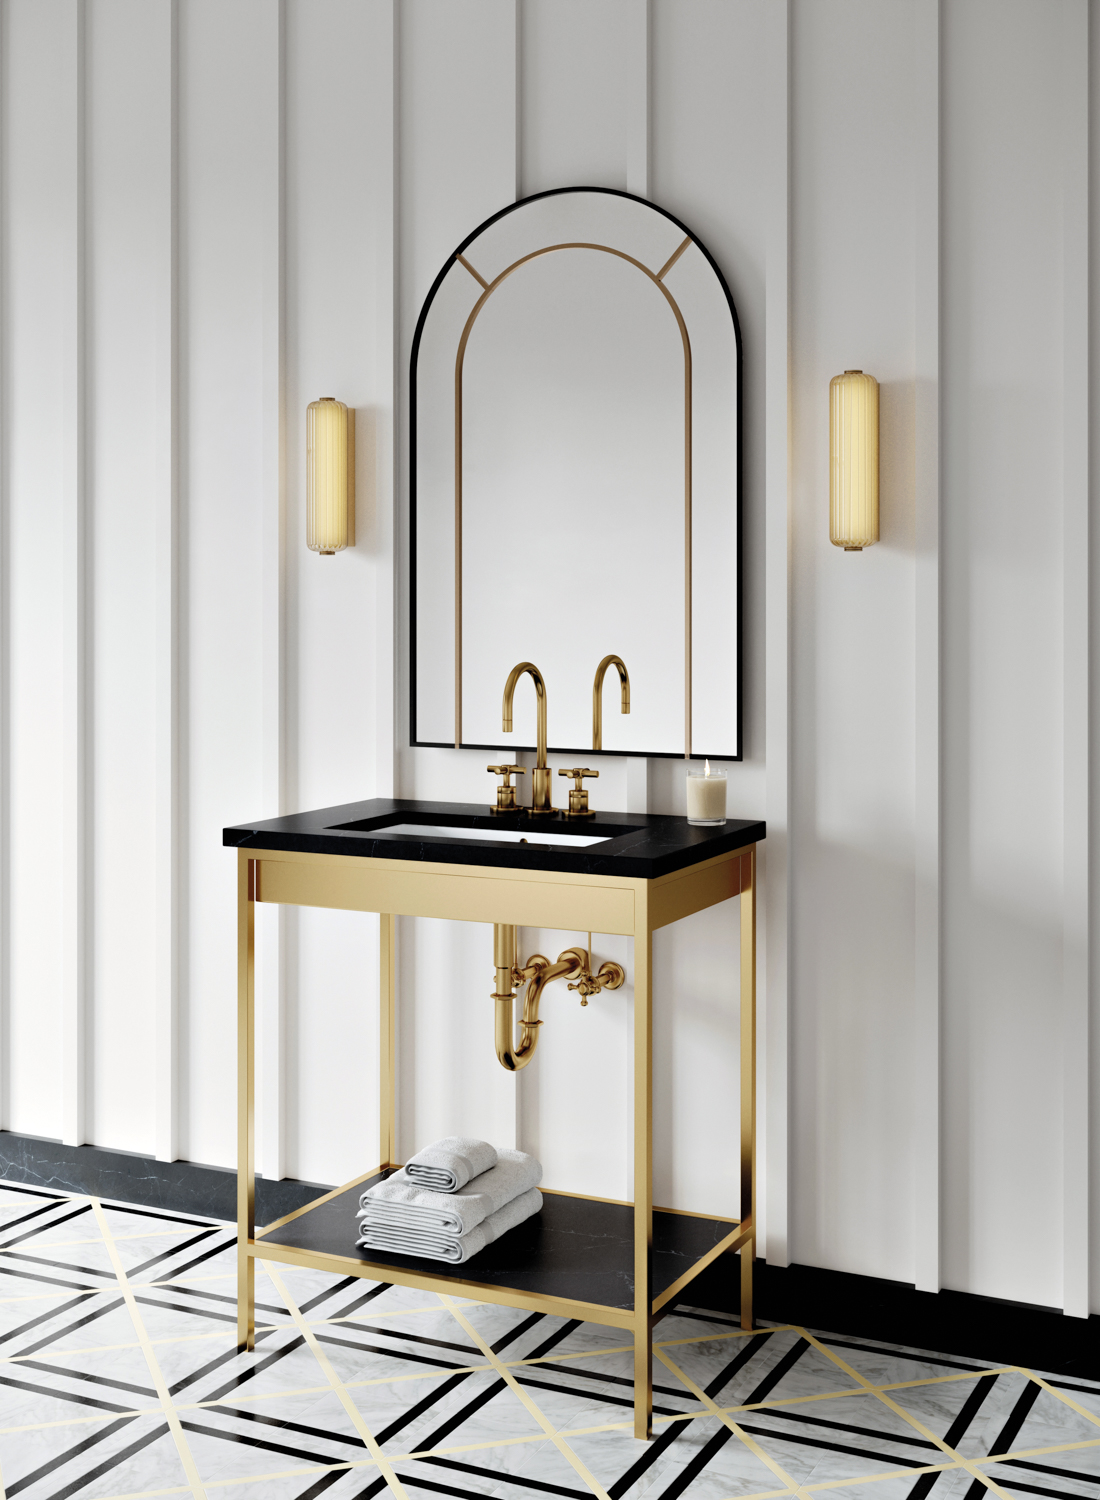 Two minimalistic gold scones flank an arched mirrow over a pedestal sink. RED Winner.